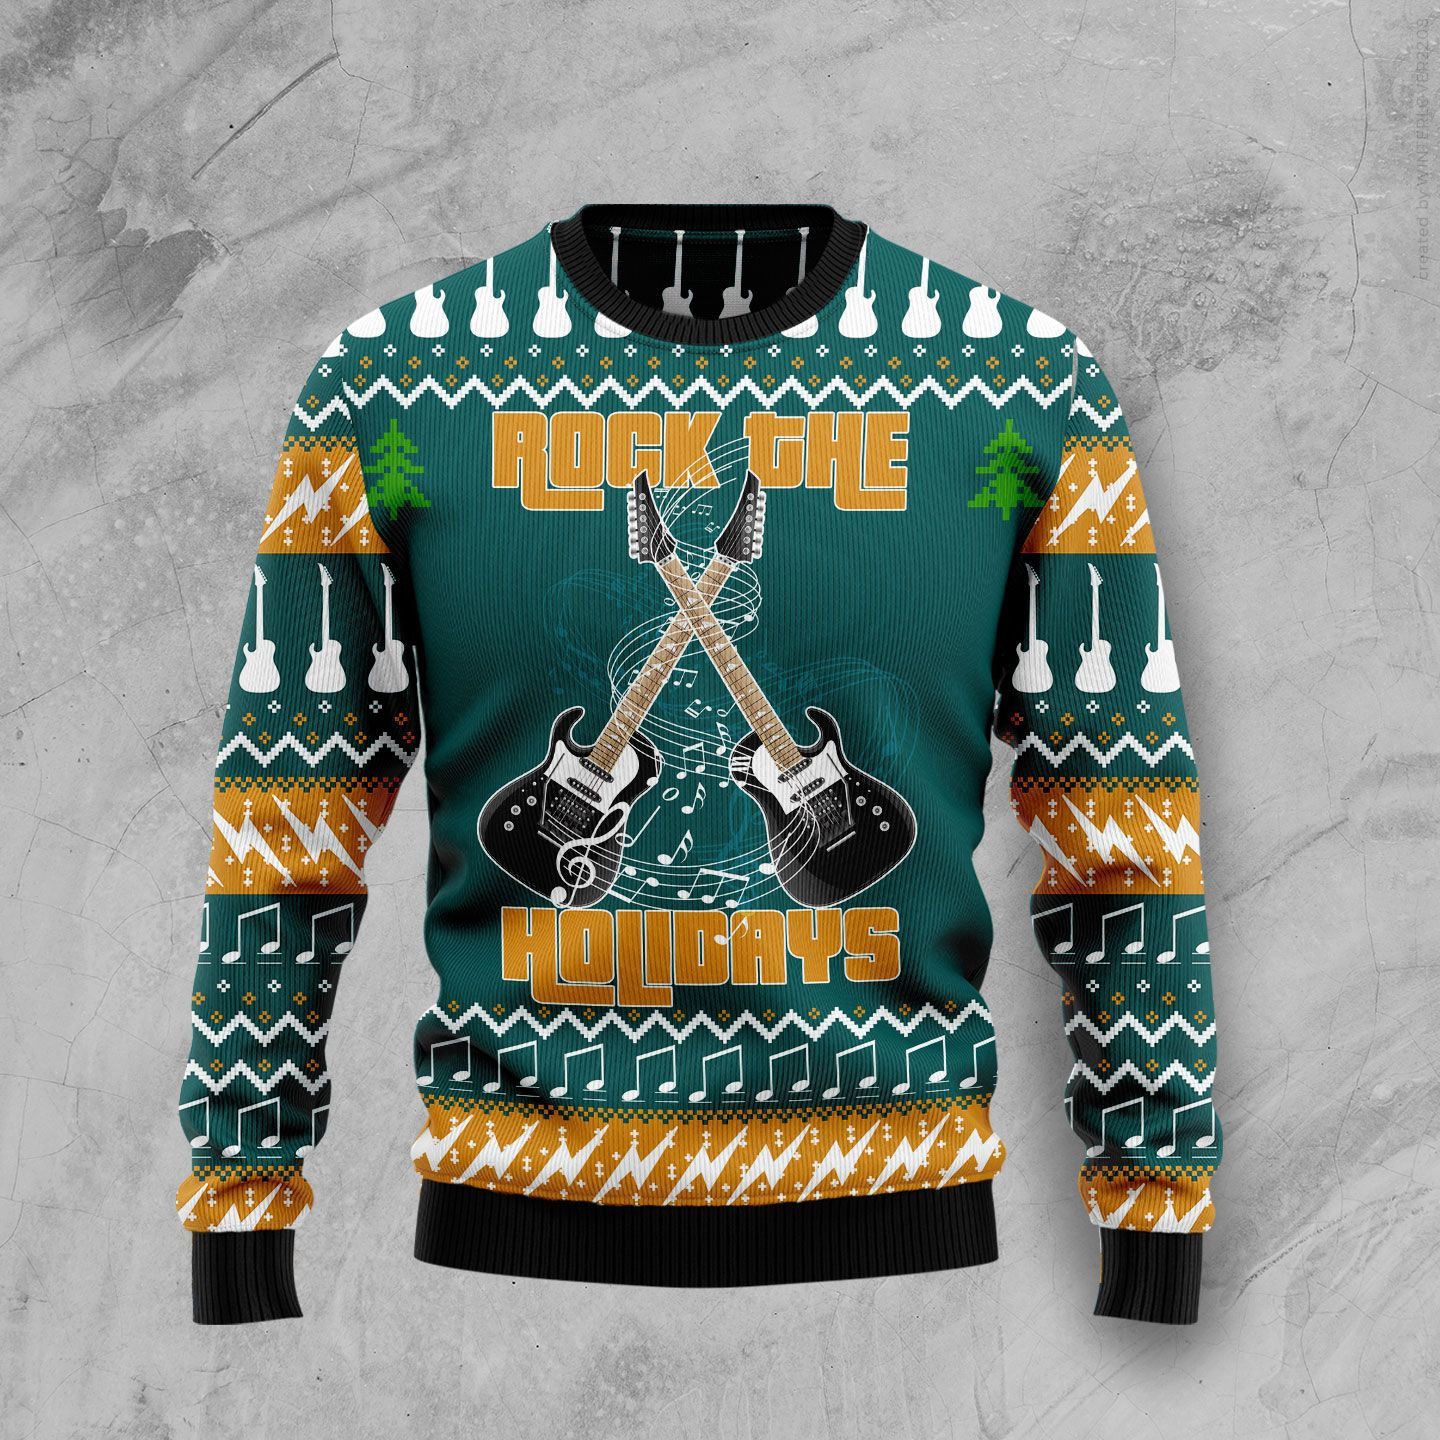 Guitar Rock The Holiday Ugly Christmas Sweater Ugly Sweater For Men Women